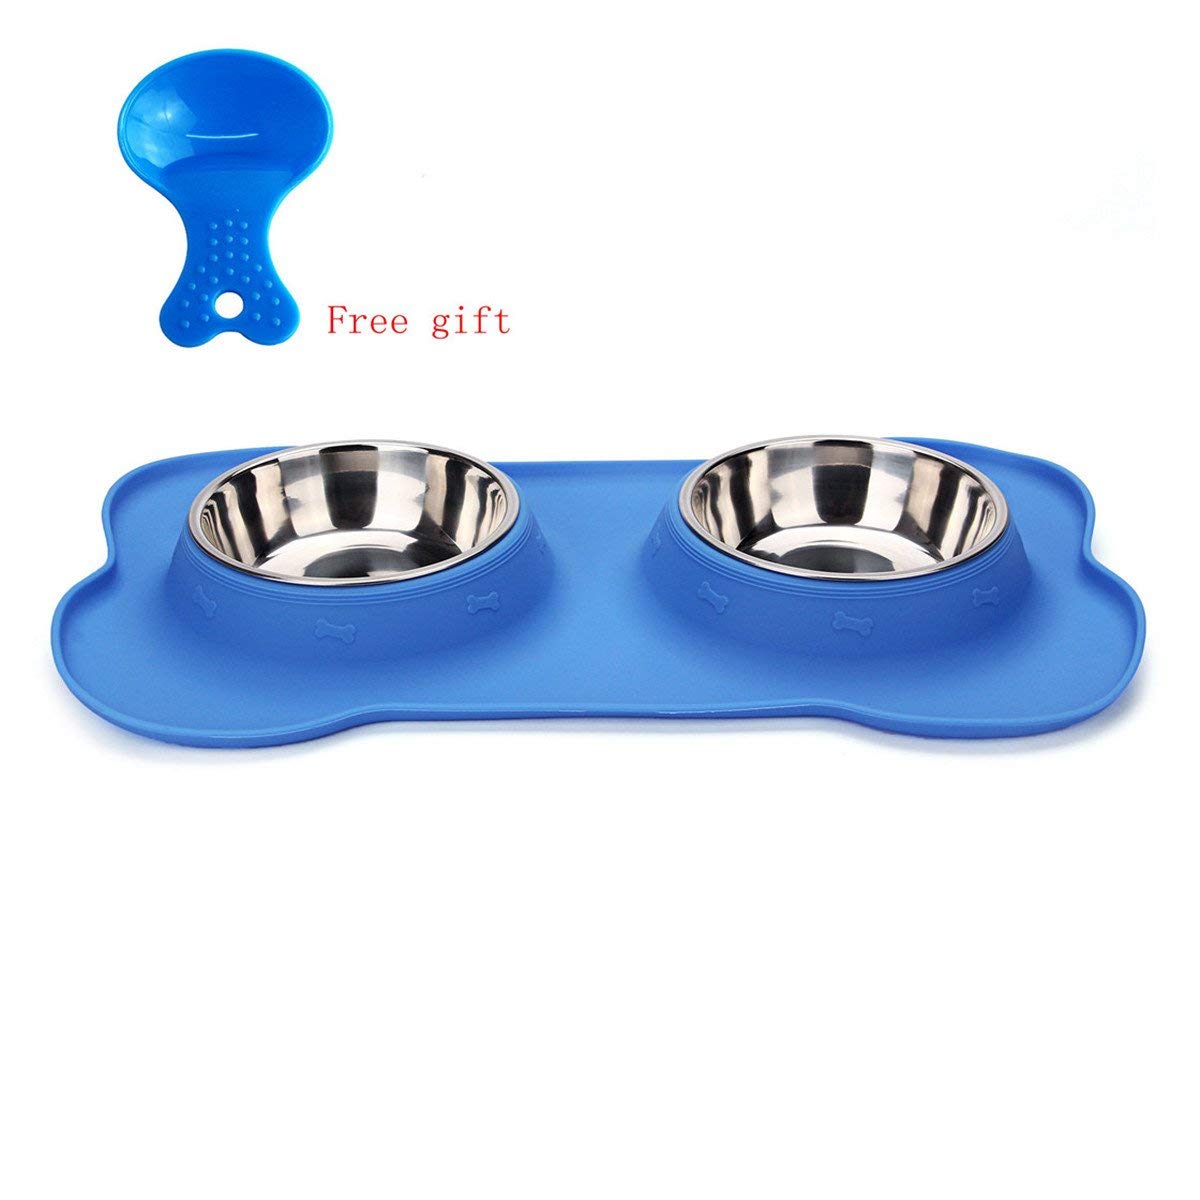 Hubulk 2 Stainless Steel Pet Dog Bowls with No Spill Non-Skid Silicone Mat  Pet Food Scoo (Large, Blue) (Copy) - So Pawtastic